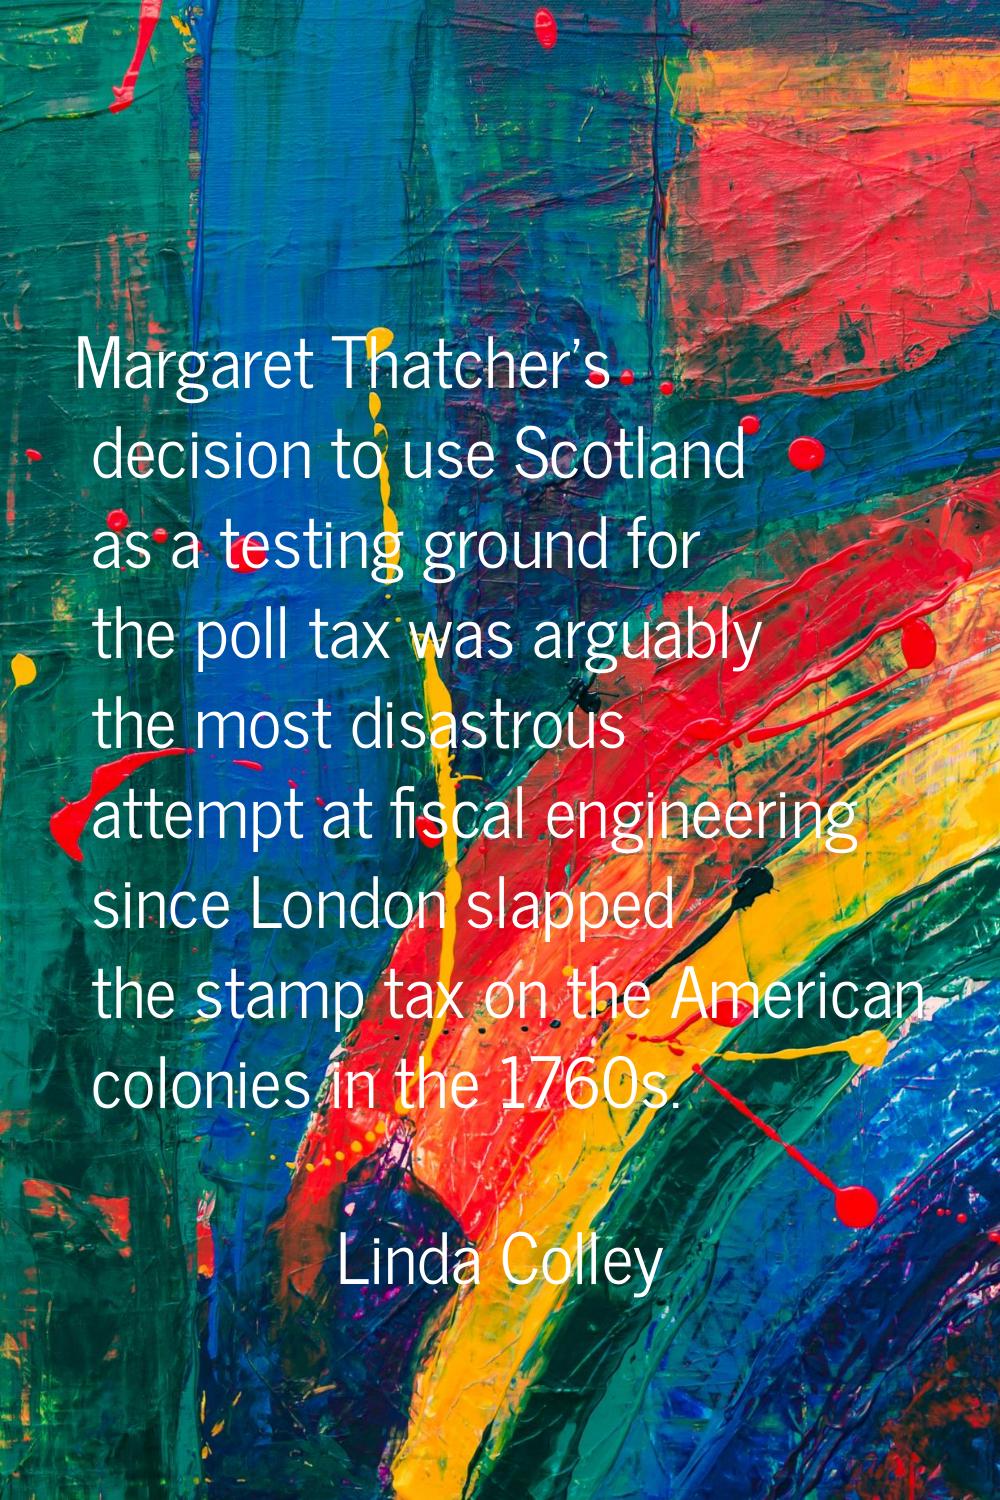 Margaret Thatcher's decision to use Scotland as a testing ground for the poll tax was arguably the 